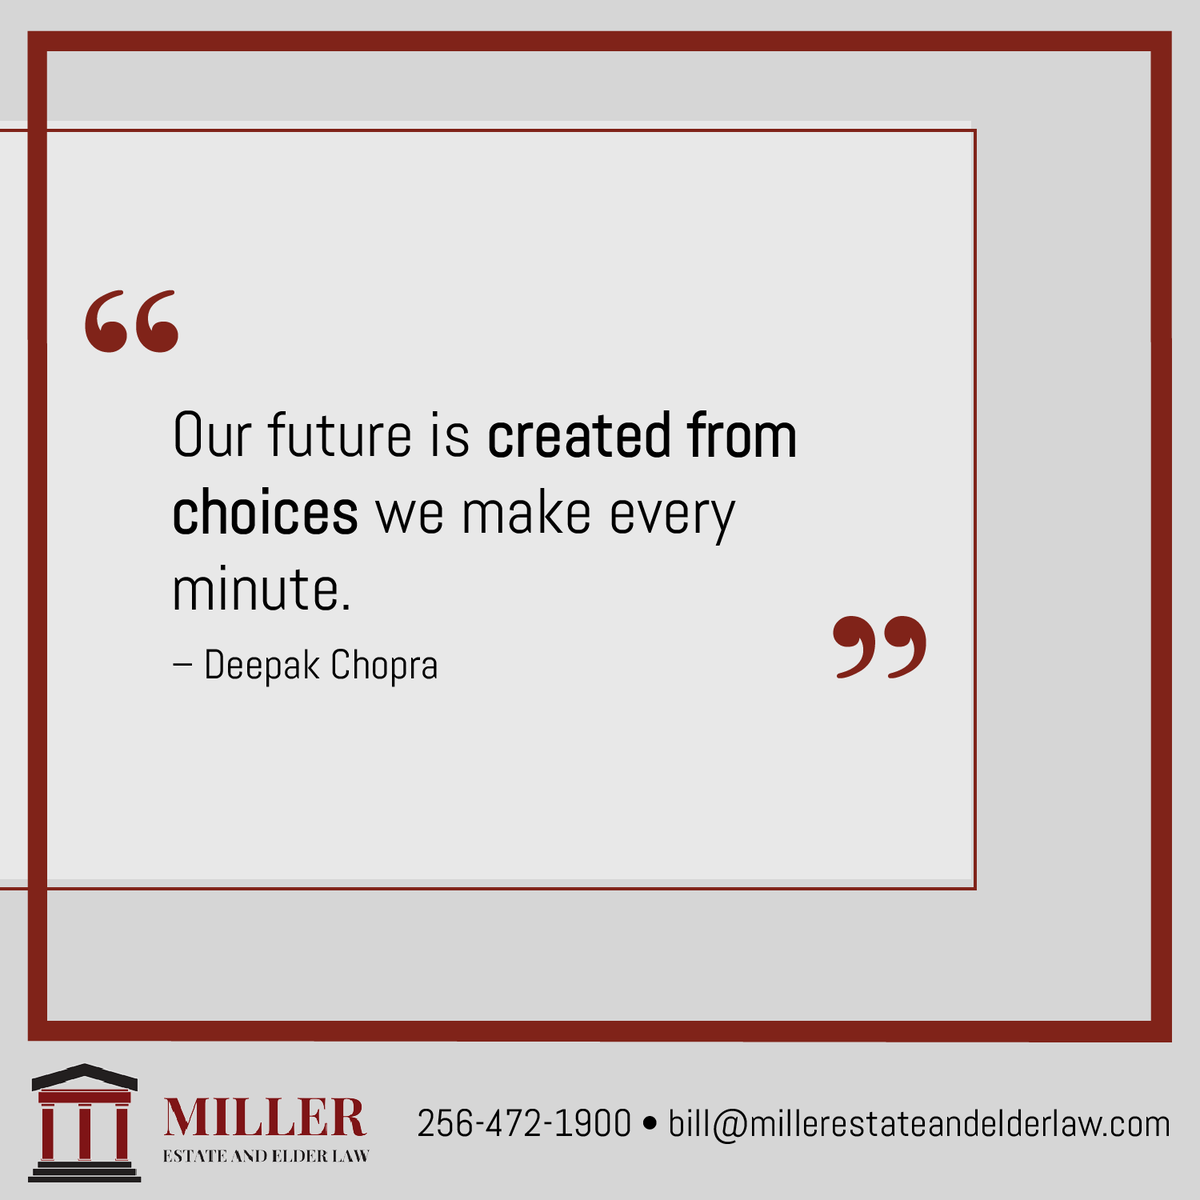 Create an estate plan that reflects your hopes and wishes for yourself and your loved ones.

The choices you make today will impact the future, so ensure a smooth journey ahead by taking action now. ⌛

#willsandtrusts #estateplanning #millerestateandelderlaw #alabamalawyer